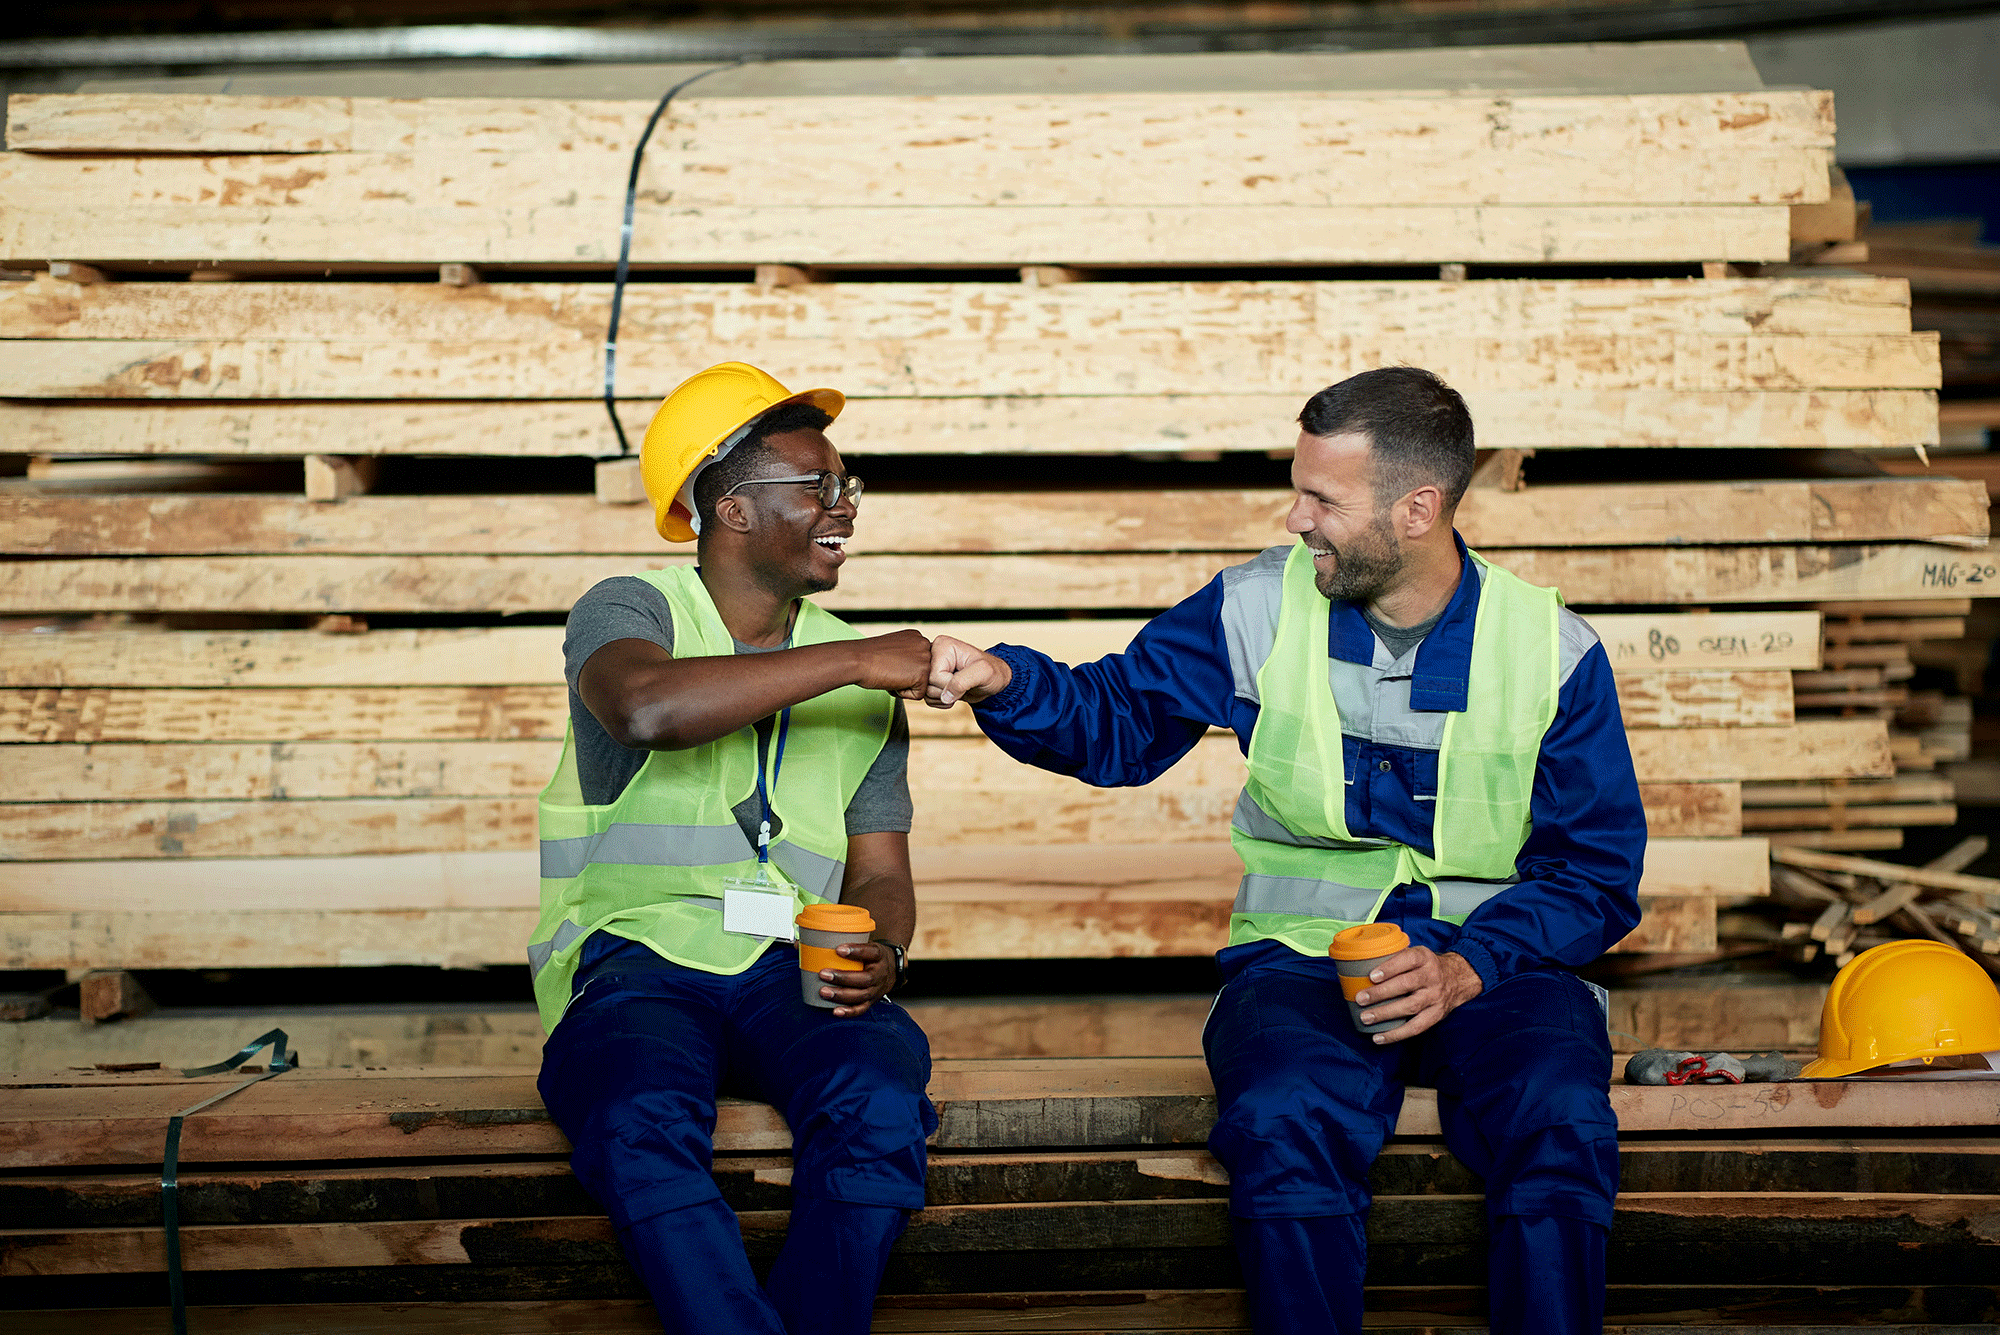 Two male workers having fun and fist bumping during their coffee break at lumber warehouse.